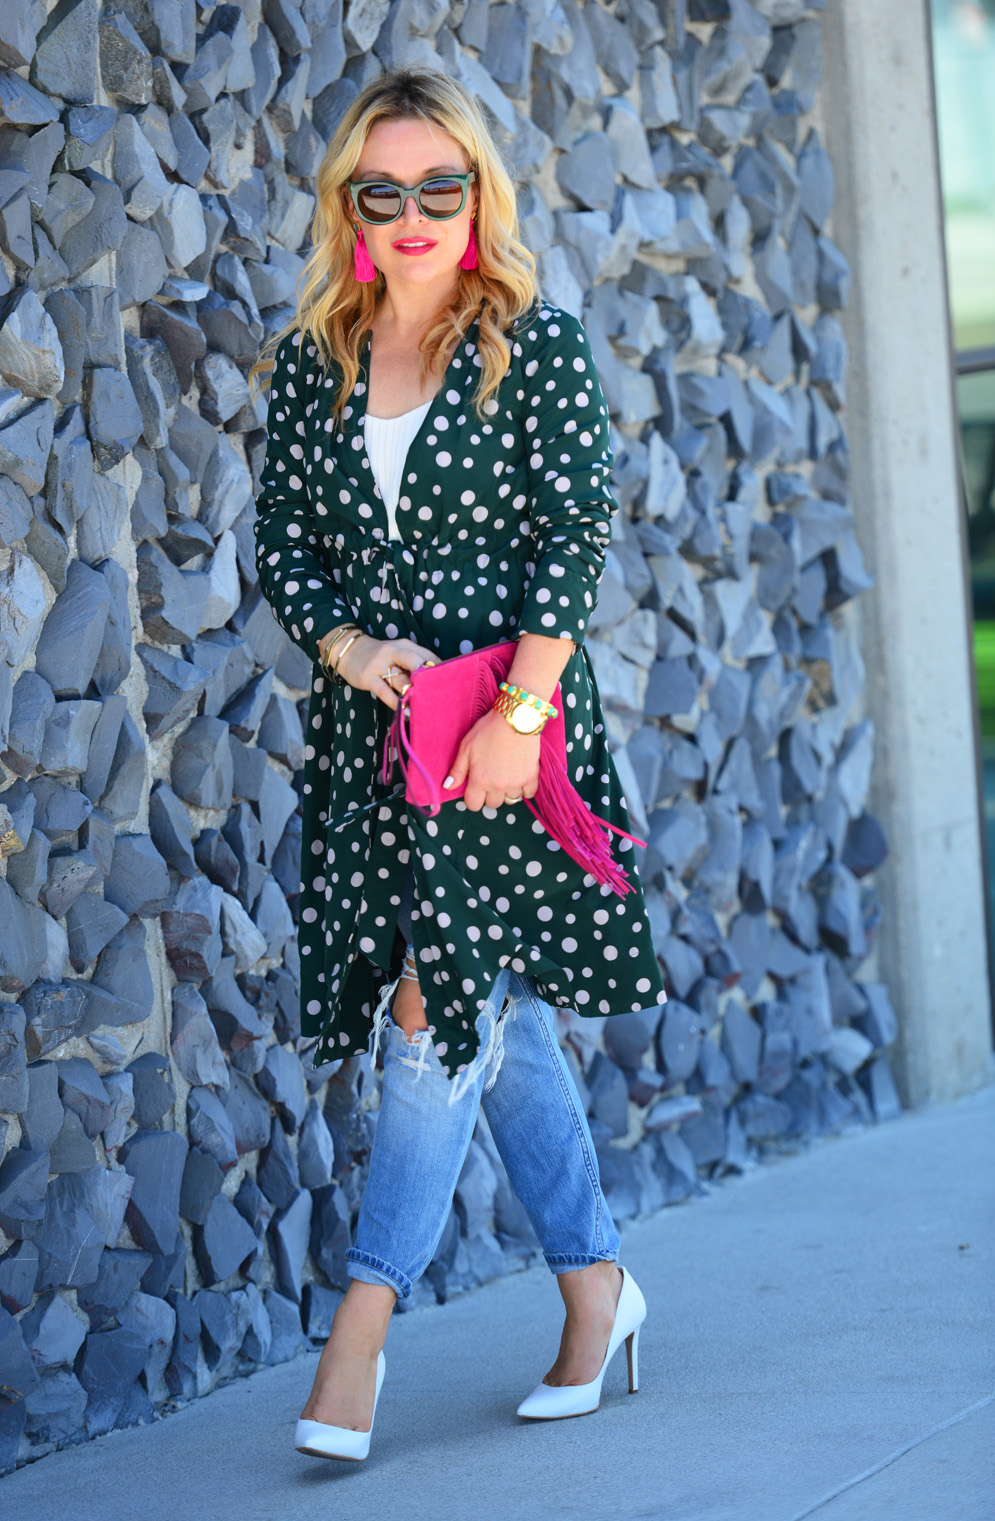 Hot Pink Accessories & Polka Dot Trench Coat - The Hunter Collector